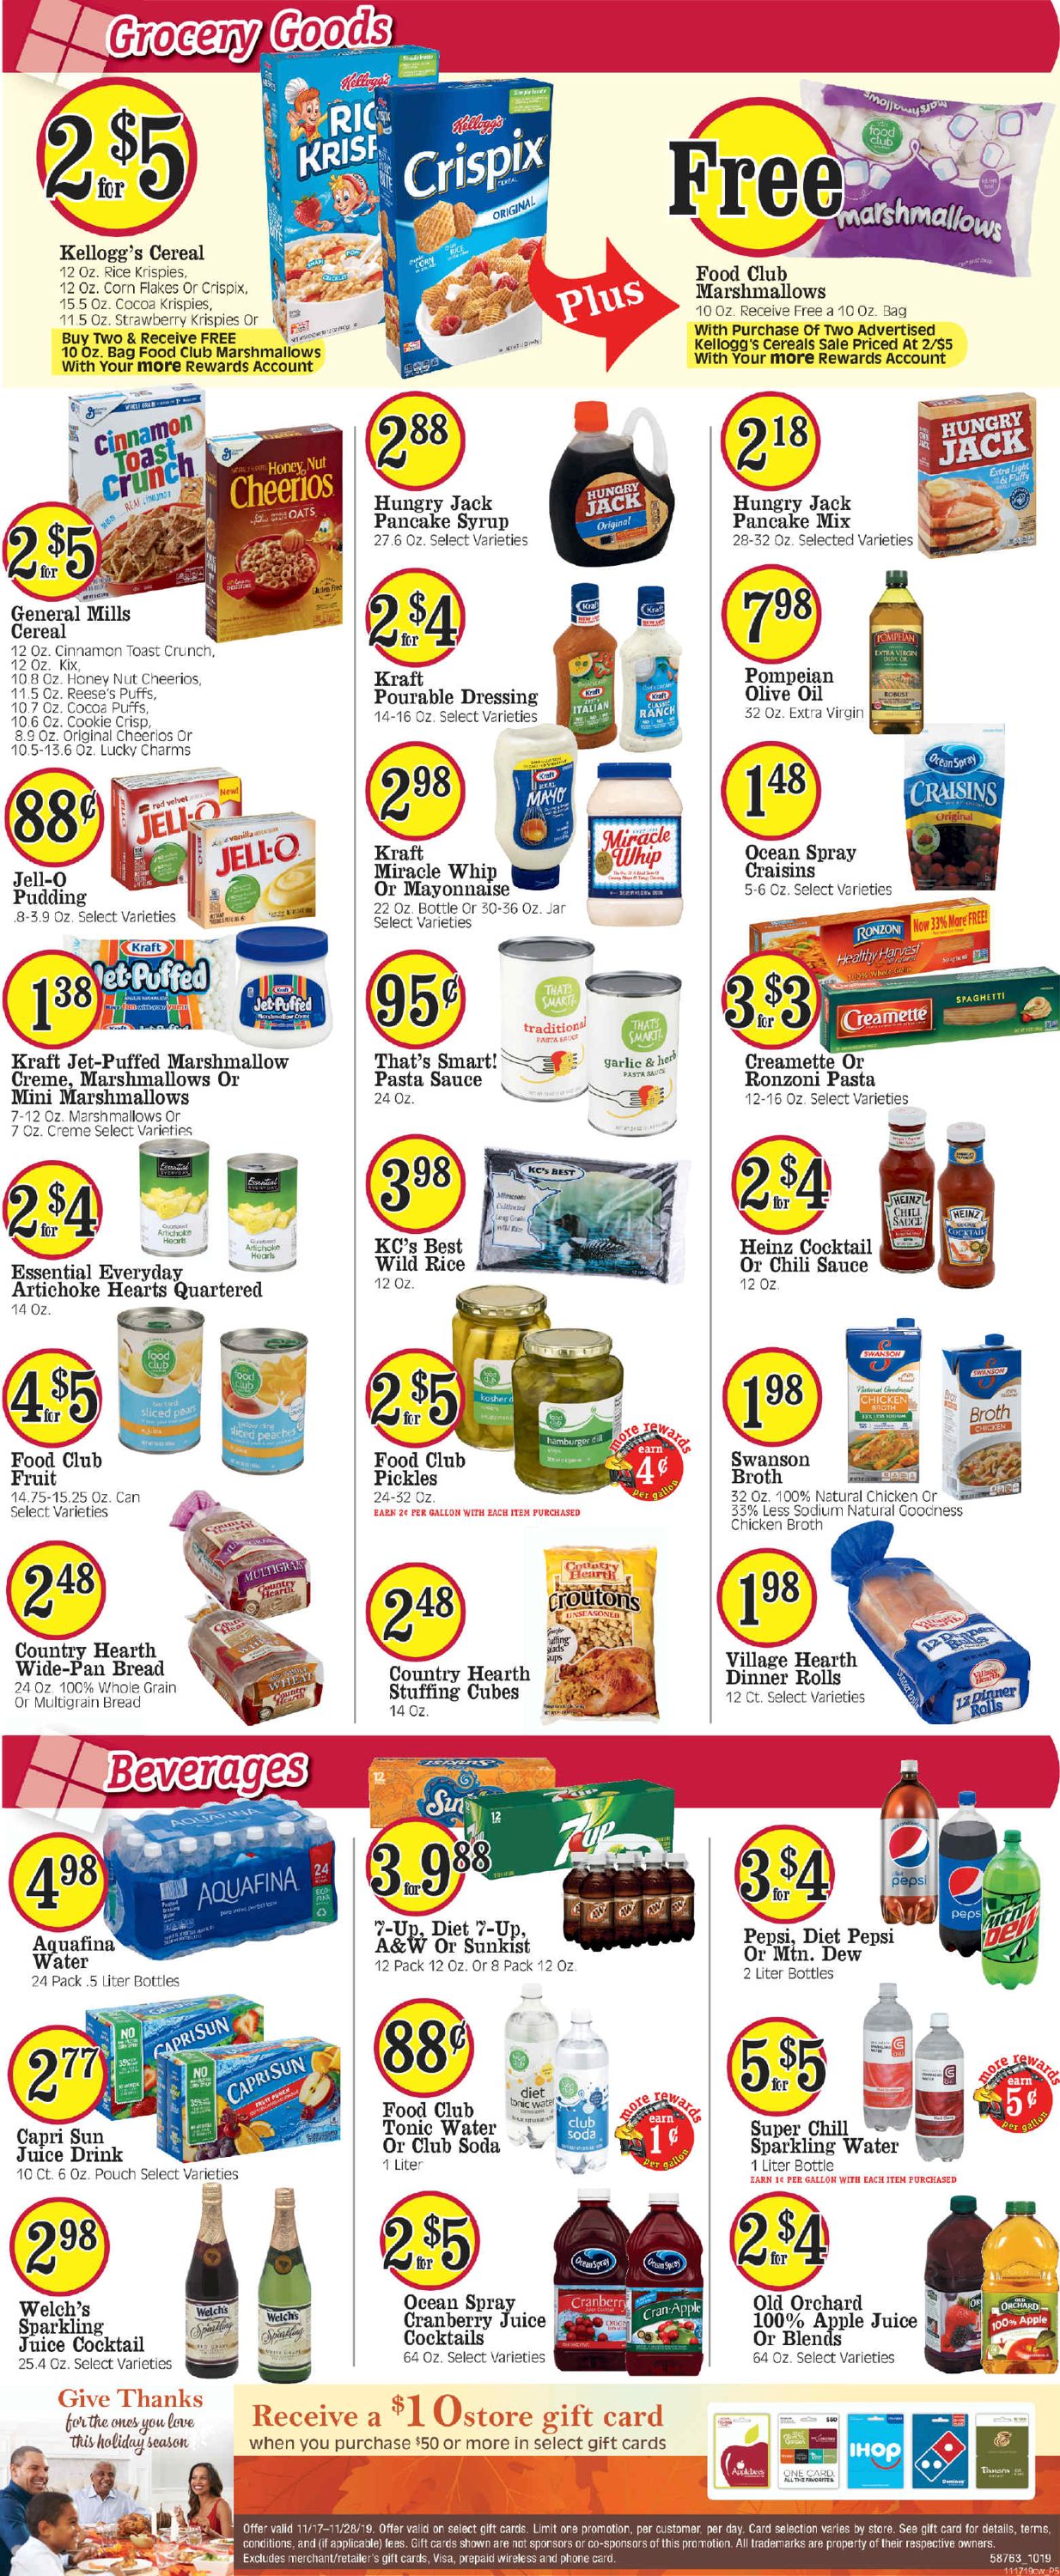 Catalogue Cash Wise - Thanksgiving Ad 2019 from 11/20/2019